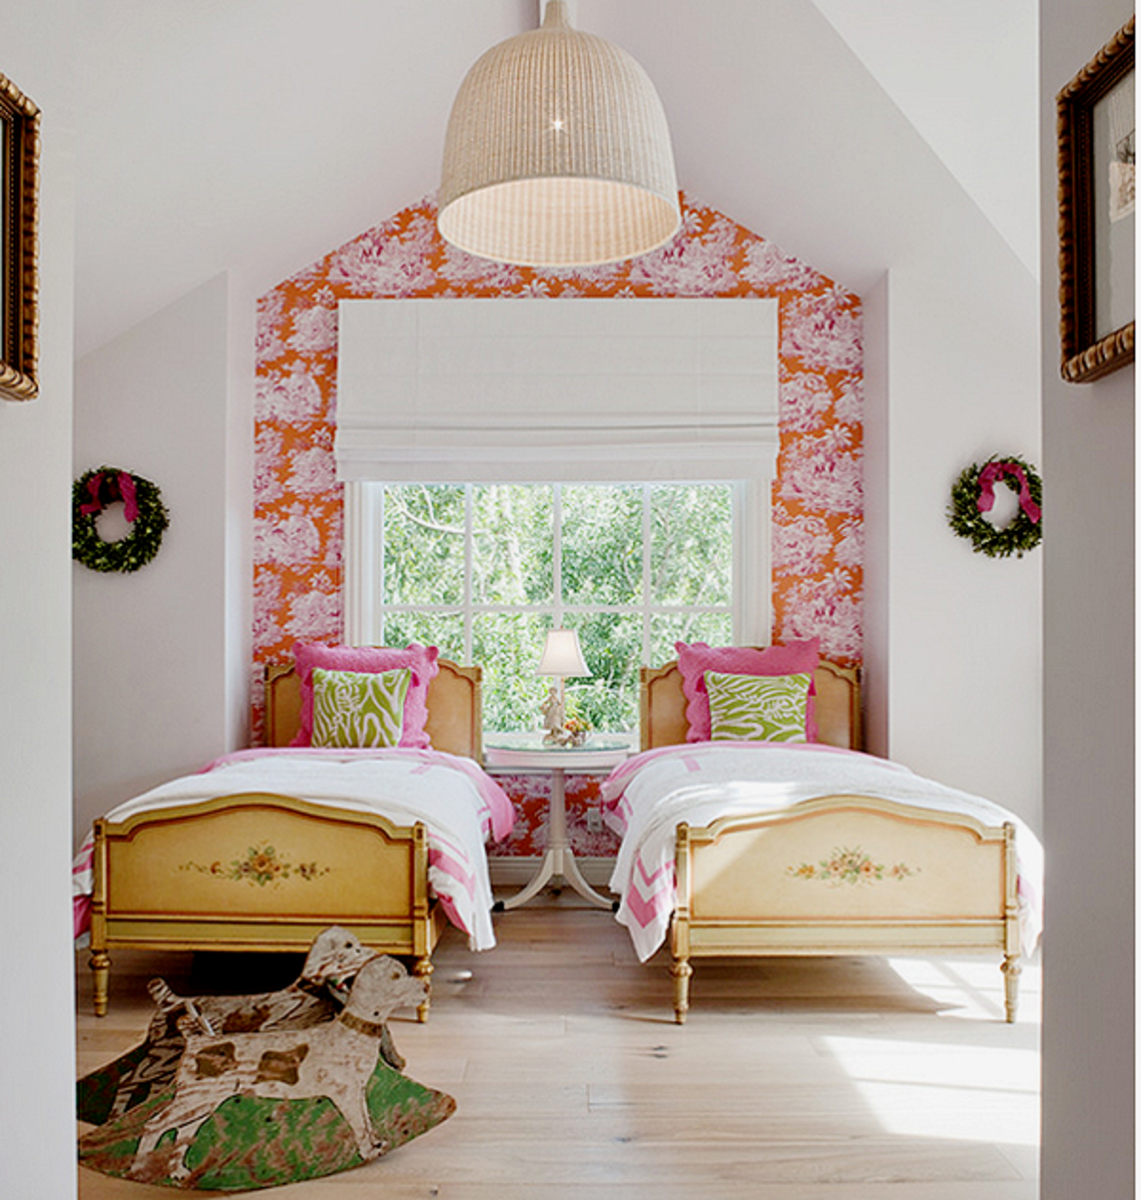 Even small bits of wallpaper in nooks and crannies can expand the look of a focal wall.